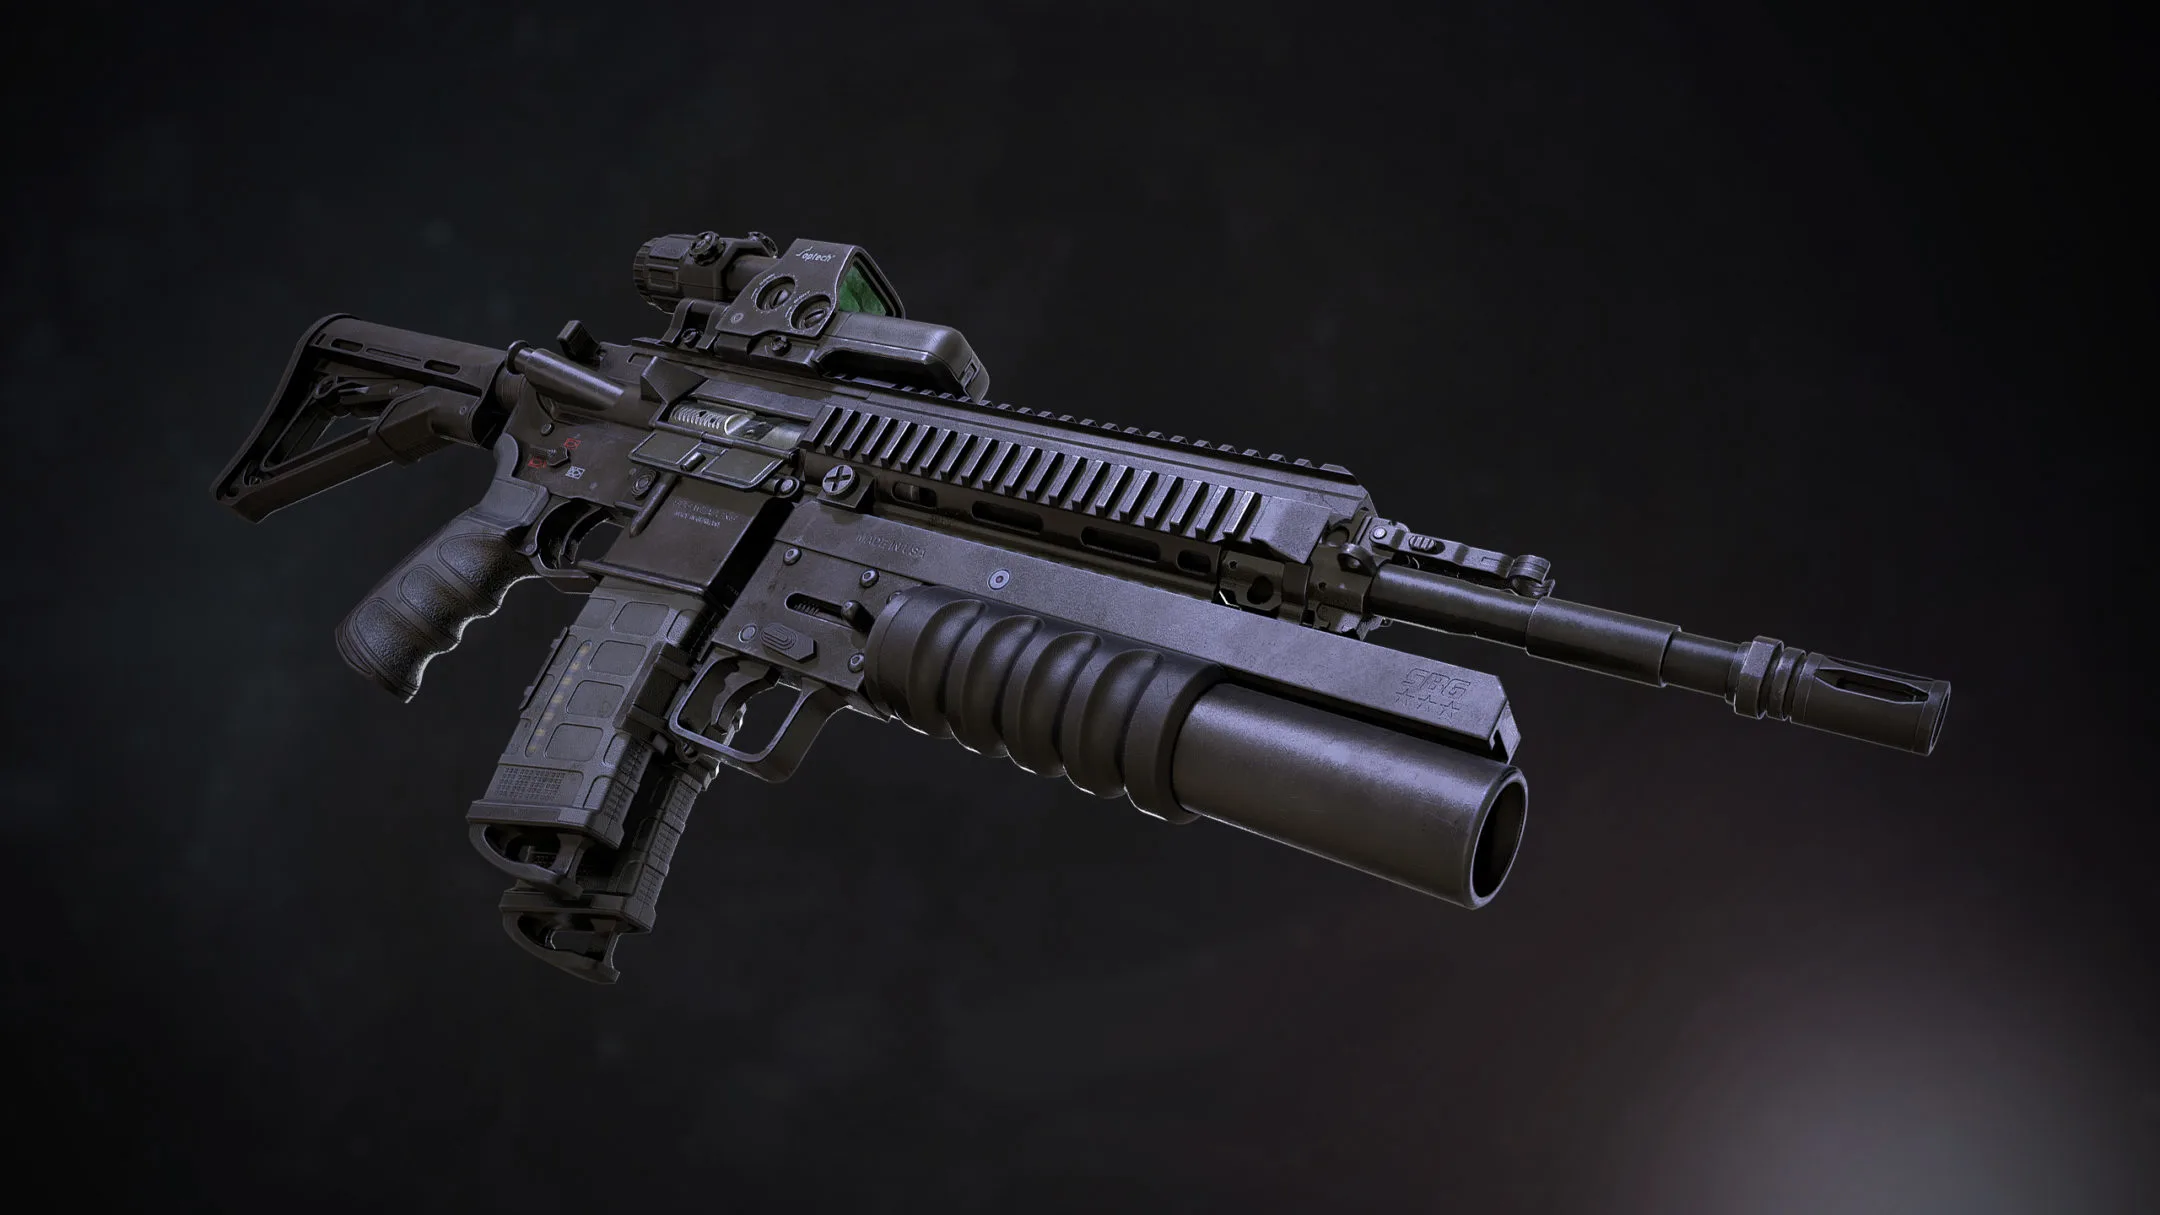 SBG Assault Rifle - Soldier of Fortune Edition